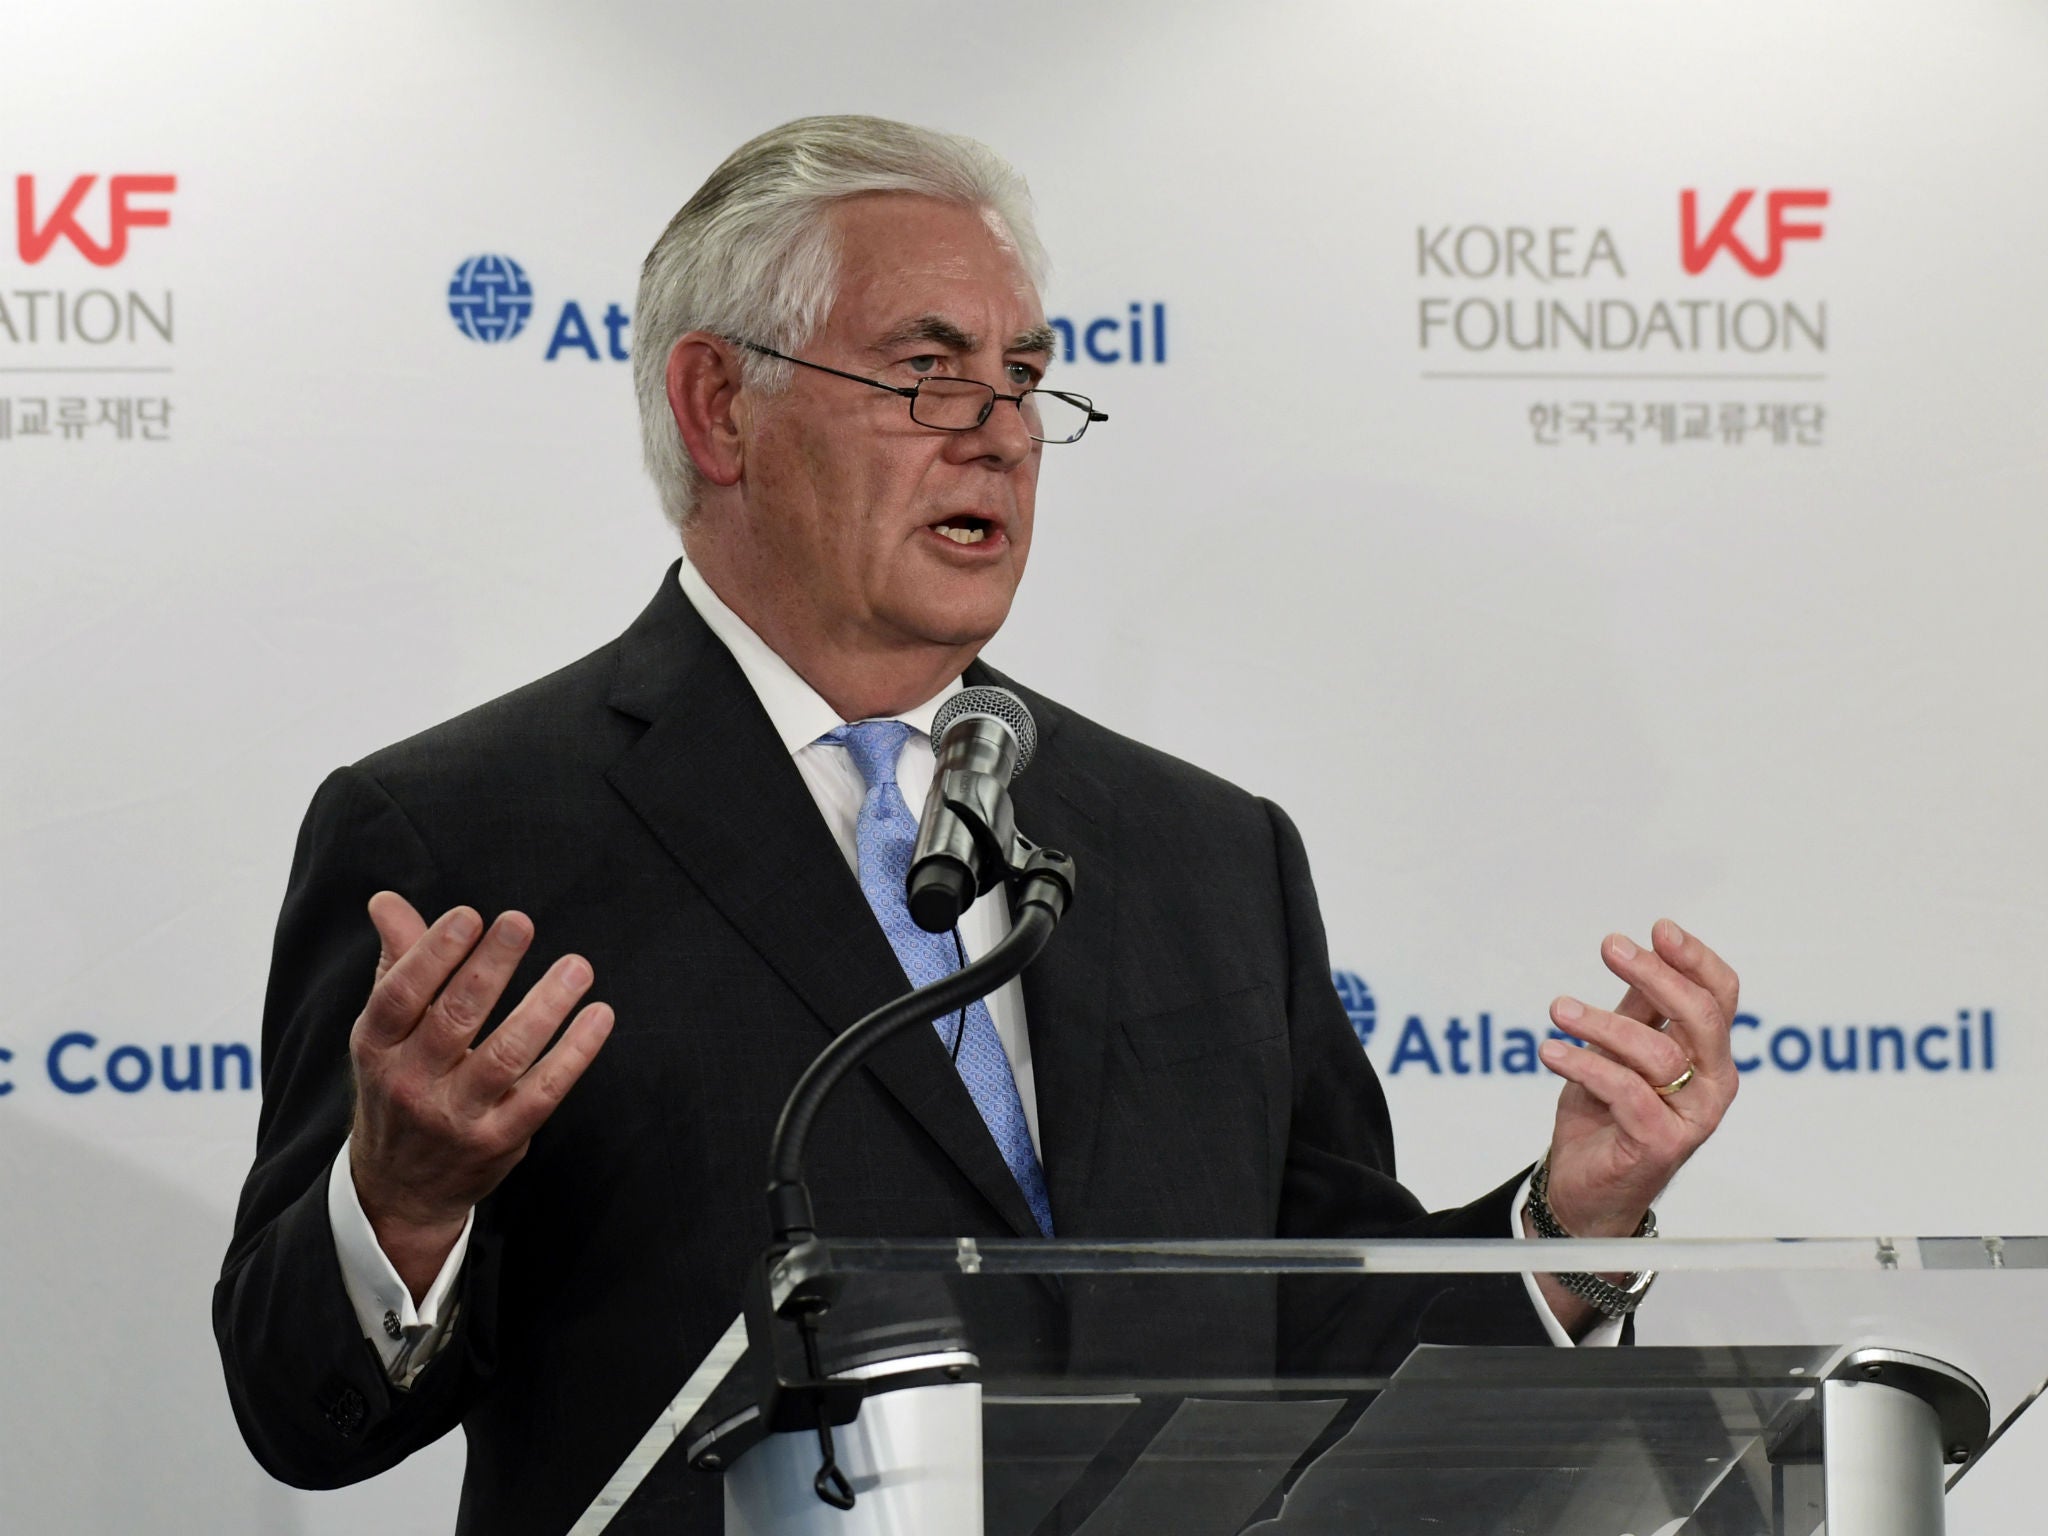 Rex Tillerson speaks at the 2017 Atlantic Council-Korea Foundation Forum in Washington, where he floated the idea of talks with North Korea.